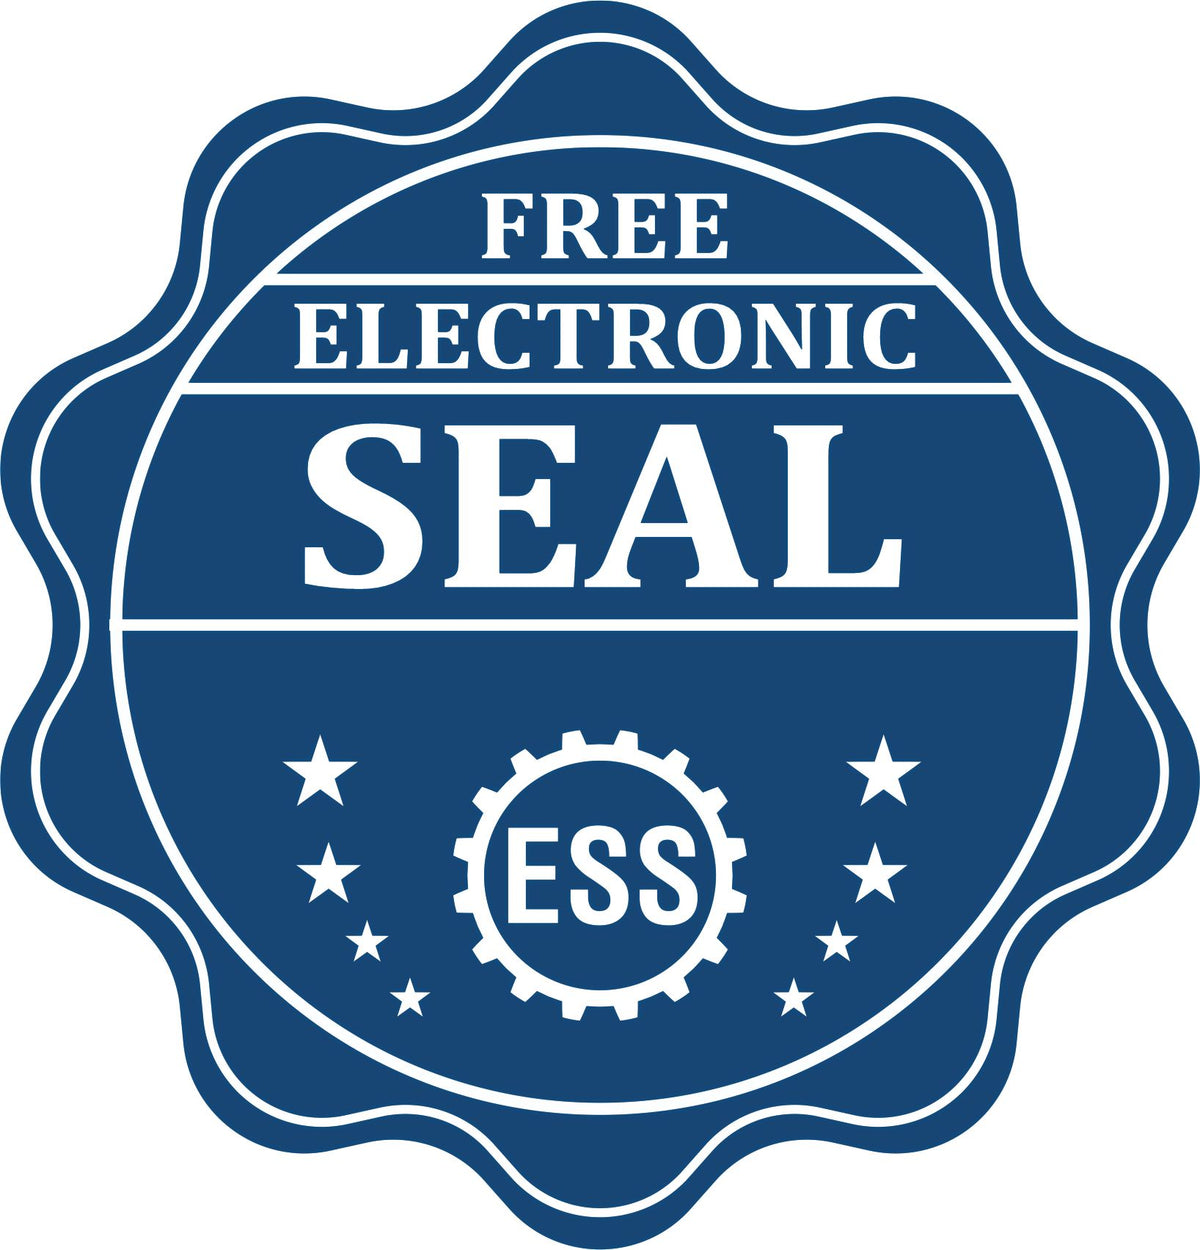 A badge showing a free electronic seal for the Heavy Duty Cast Iron Rhode Island Architect Embosser with stars and the ESS gear on the emblem.